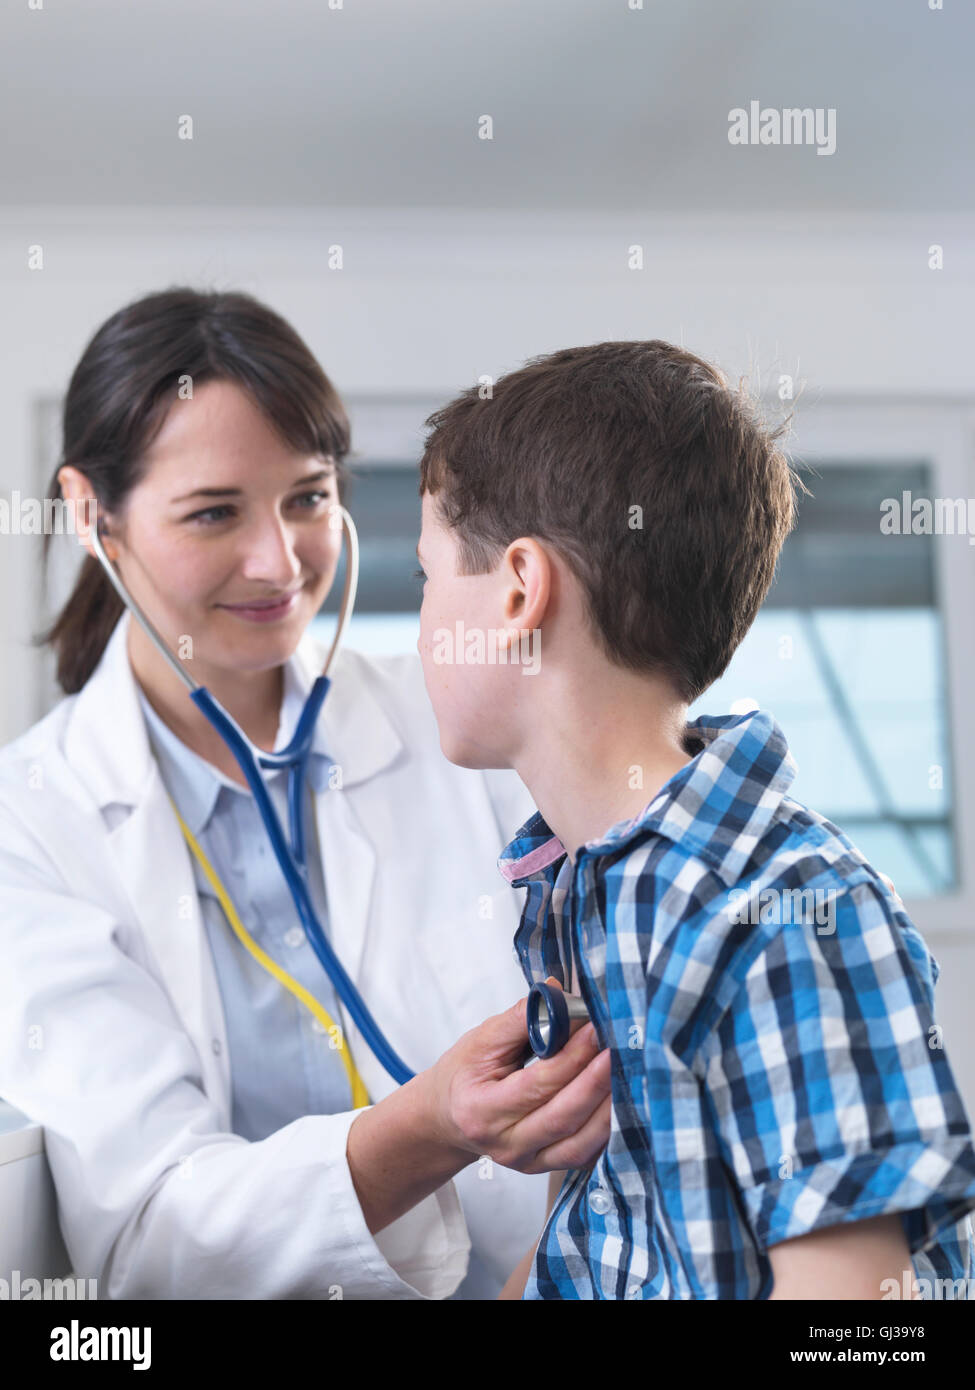 Doctor checking boy's breathing with stethoscope Stock Photo - Alamy